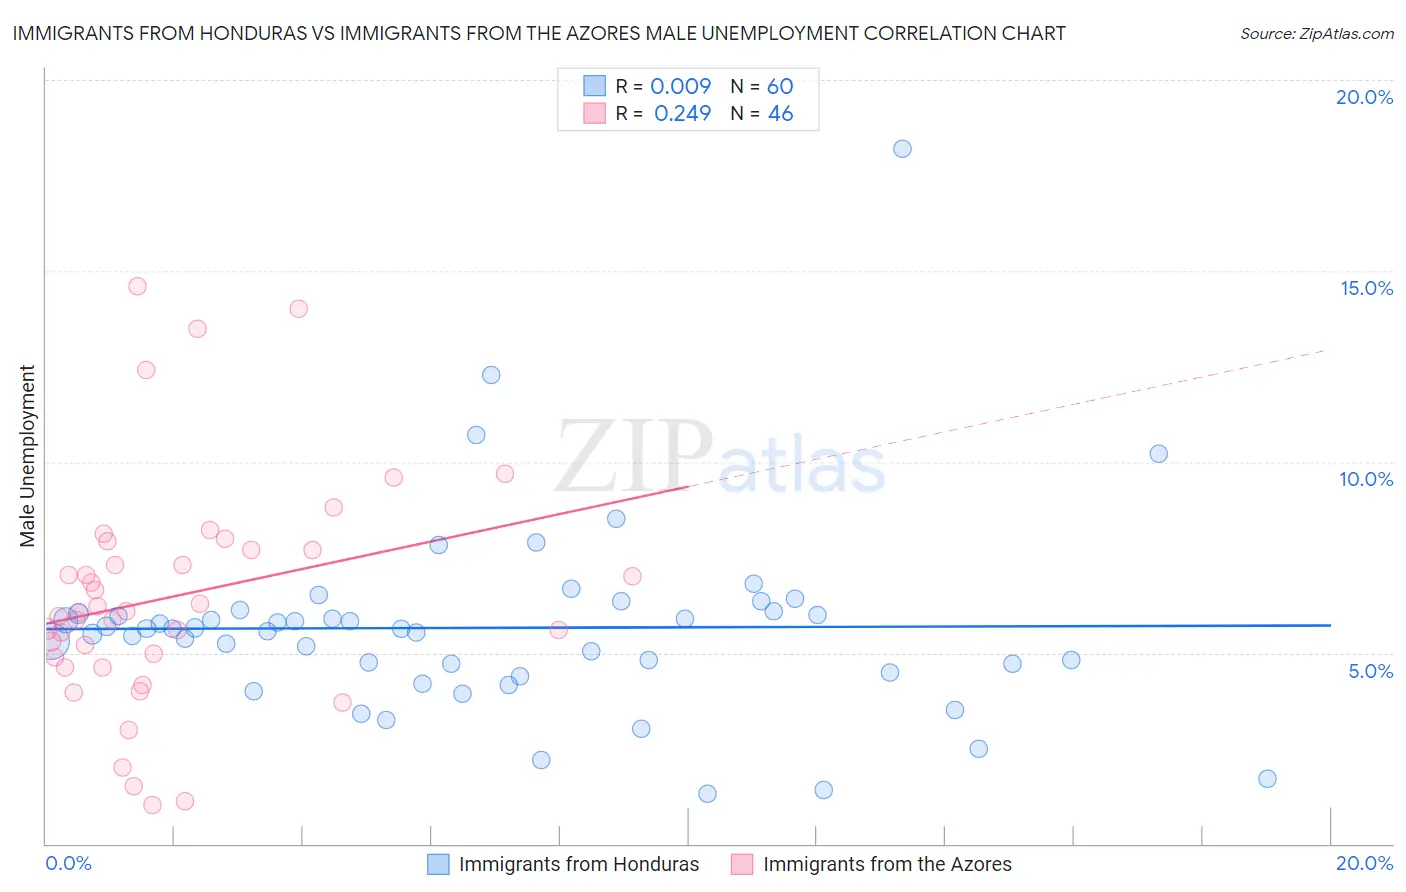 Immigrants from Honduras vs Immigrants from the Azores Male Unemployment